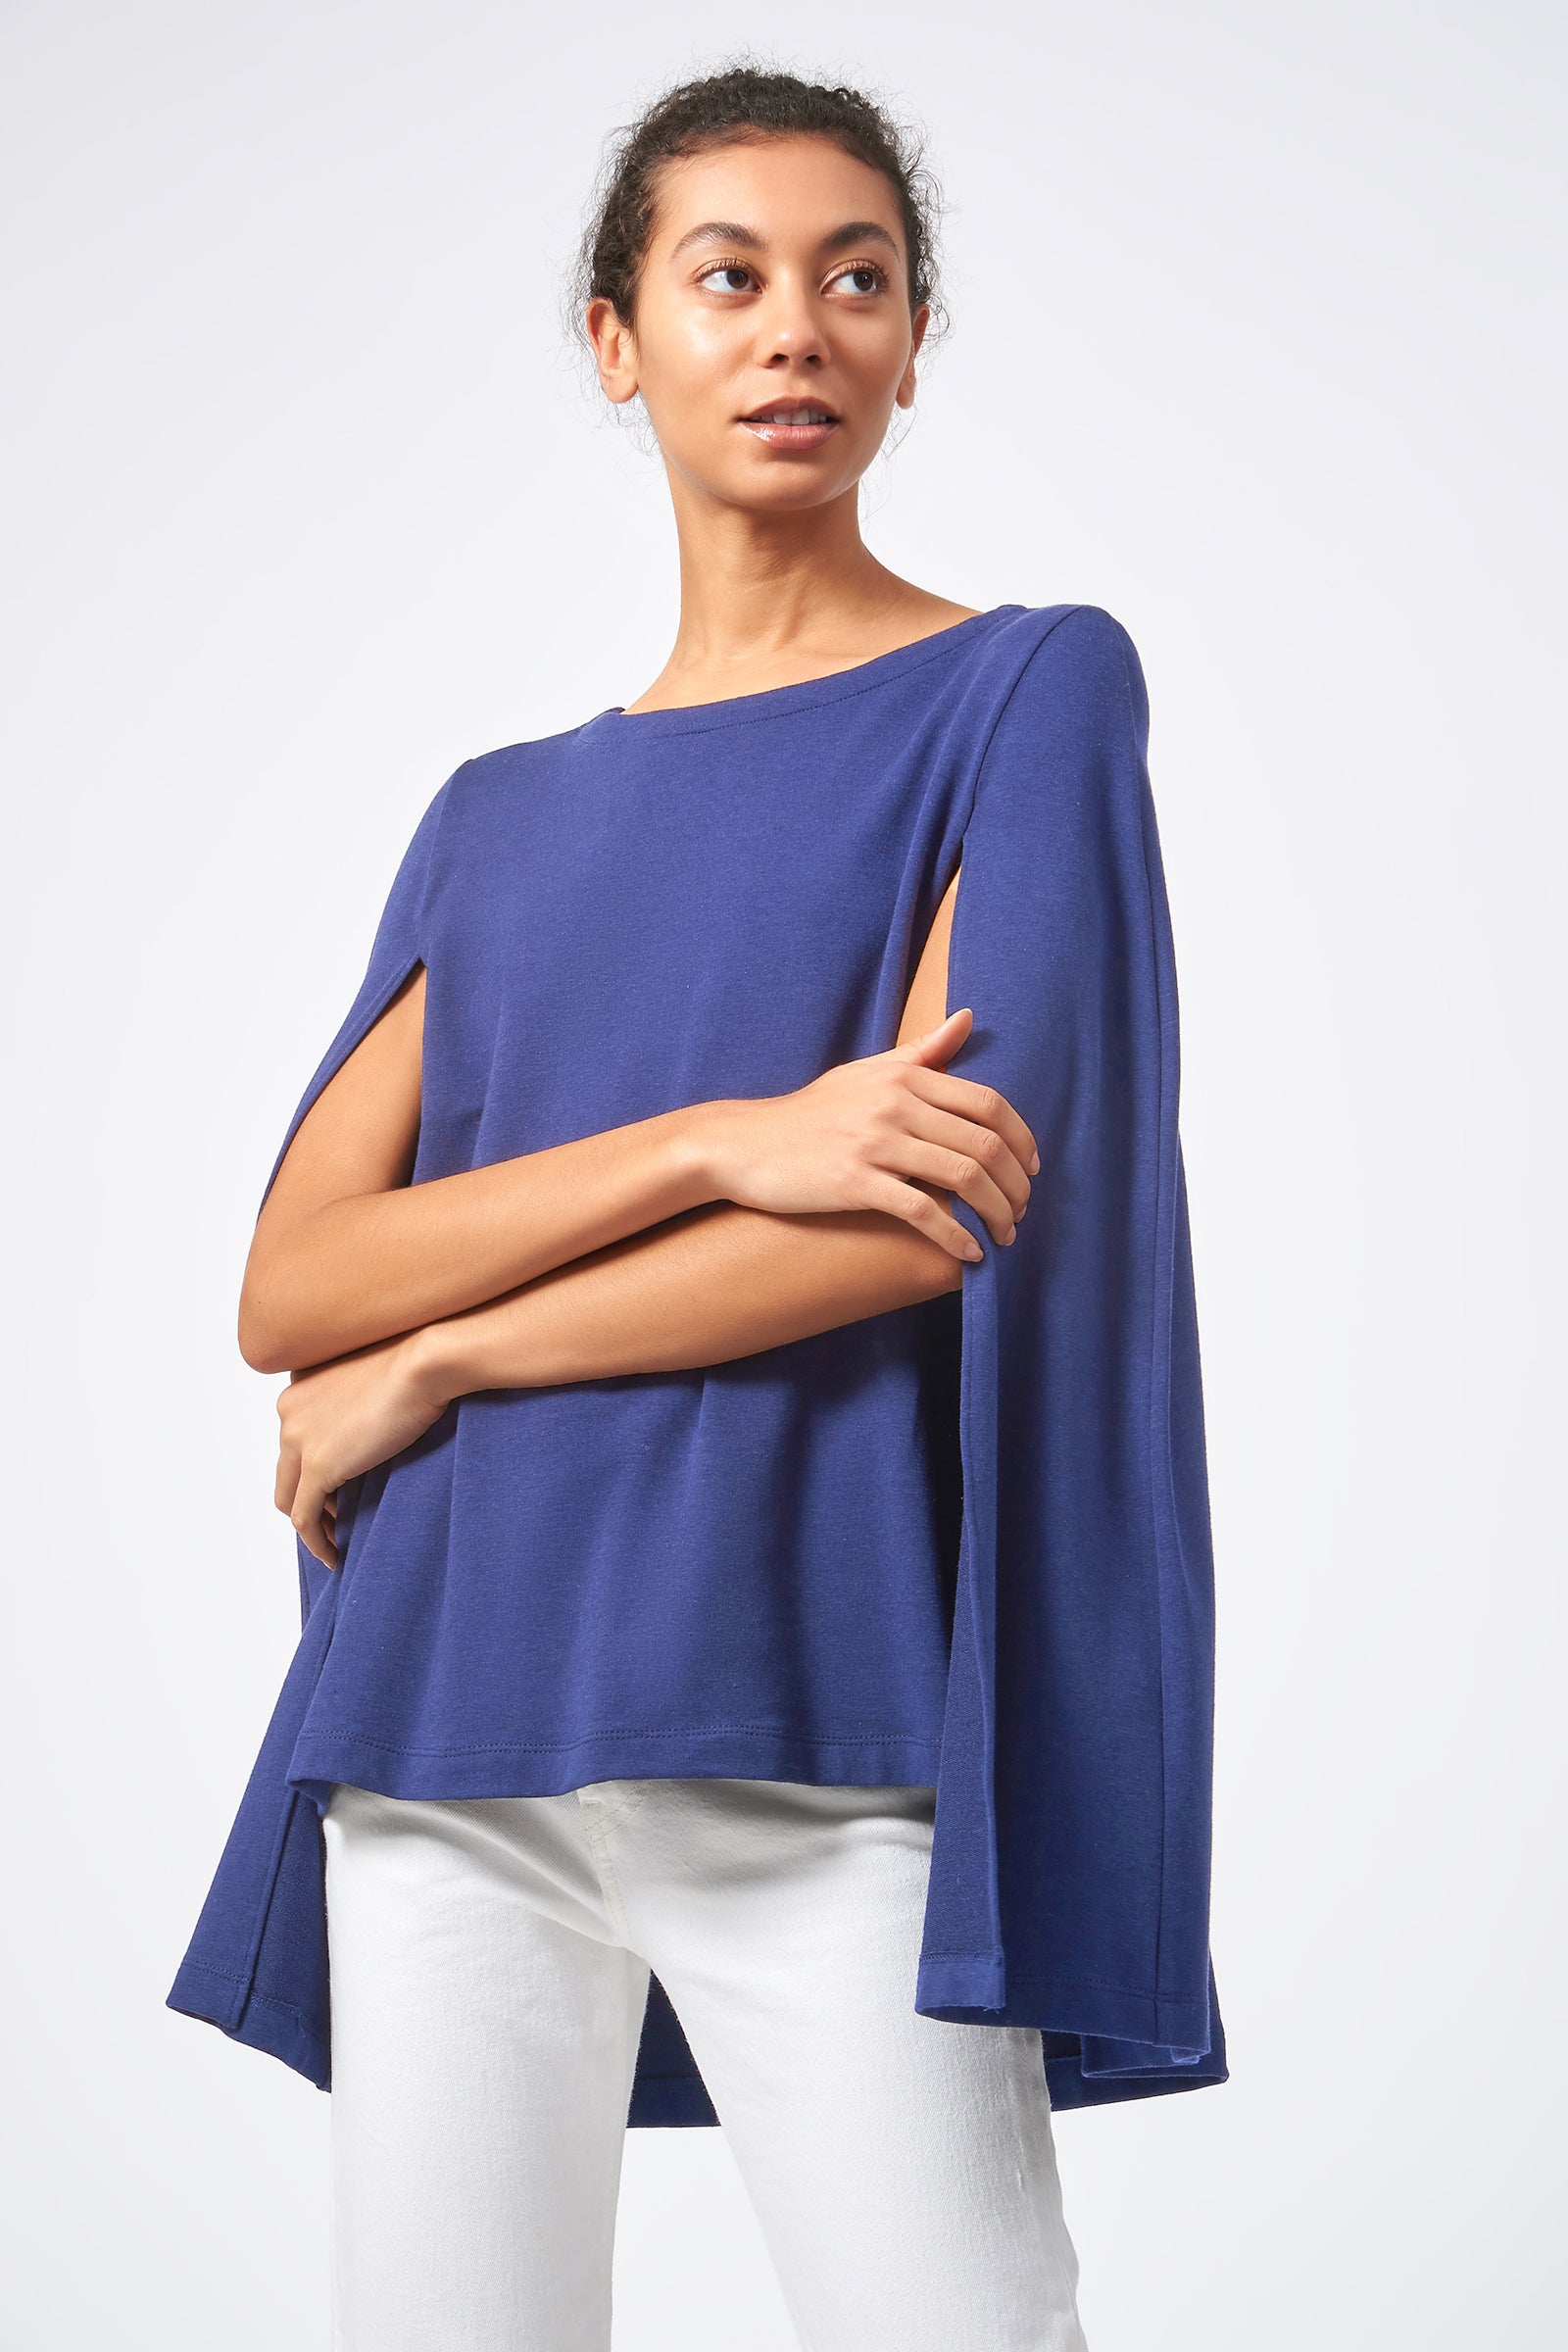 Kal Rieman Cape Sweatshirt in Bamboo Terry Blue image of the main side view